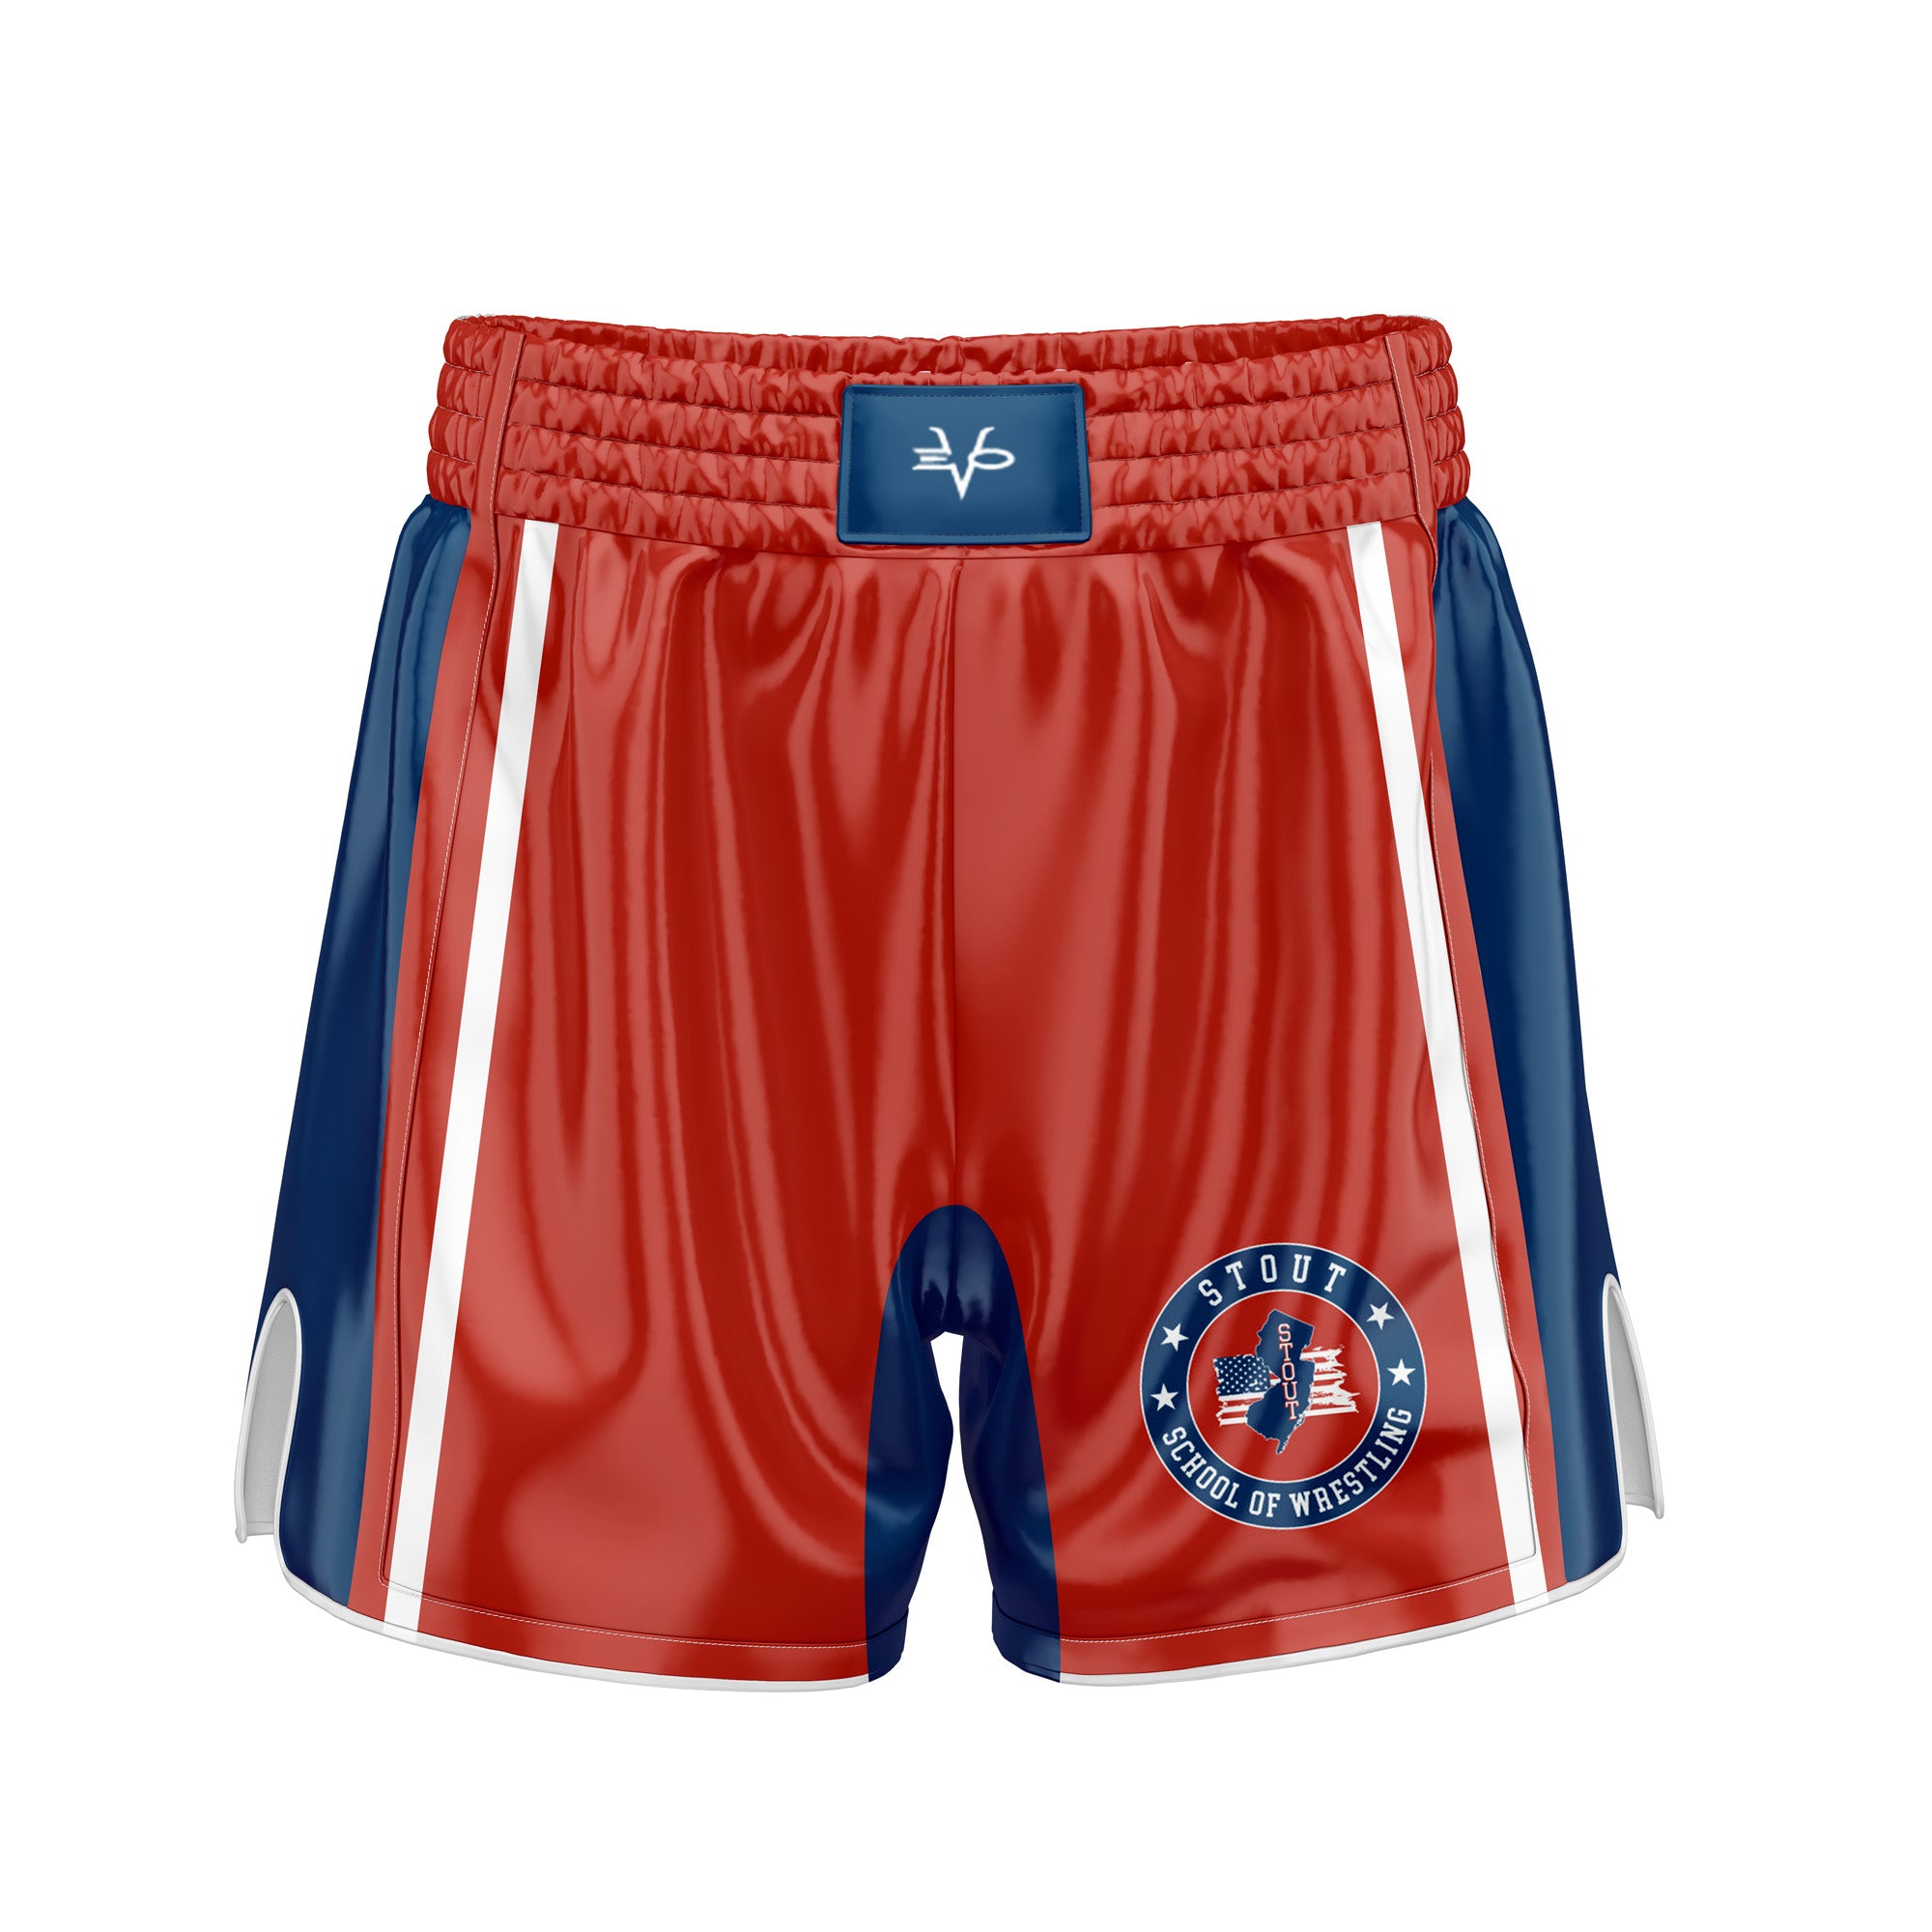 STOUT WRESTLING FIGHT SHORTS (RED)